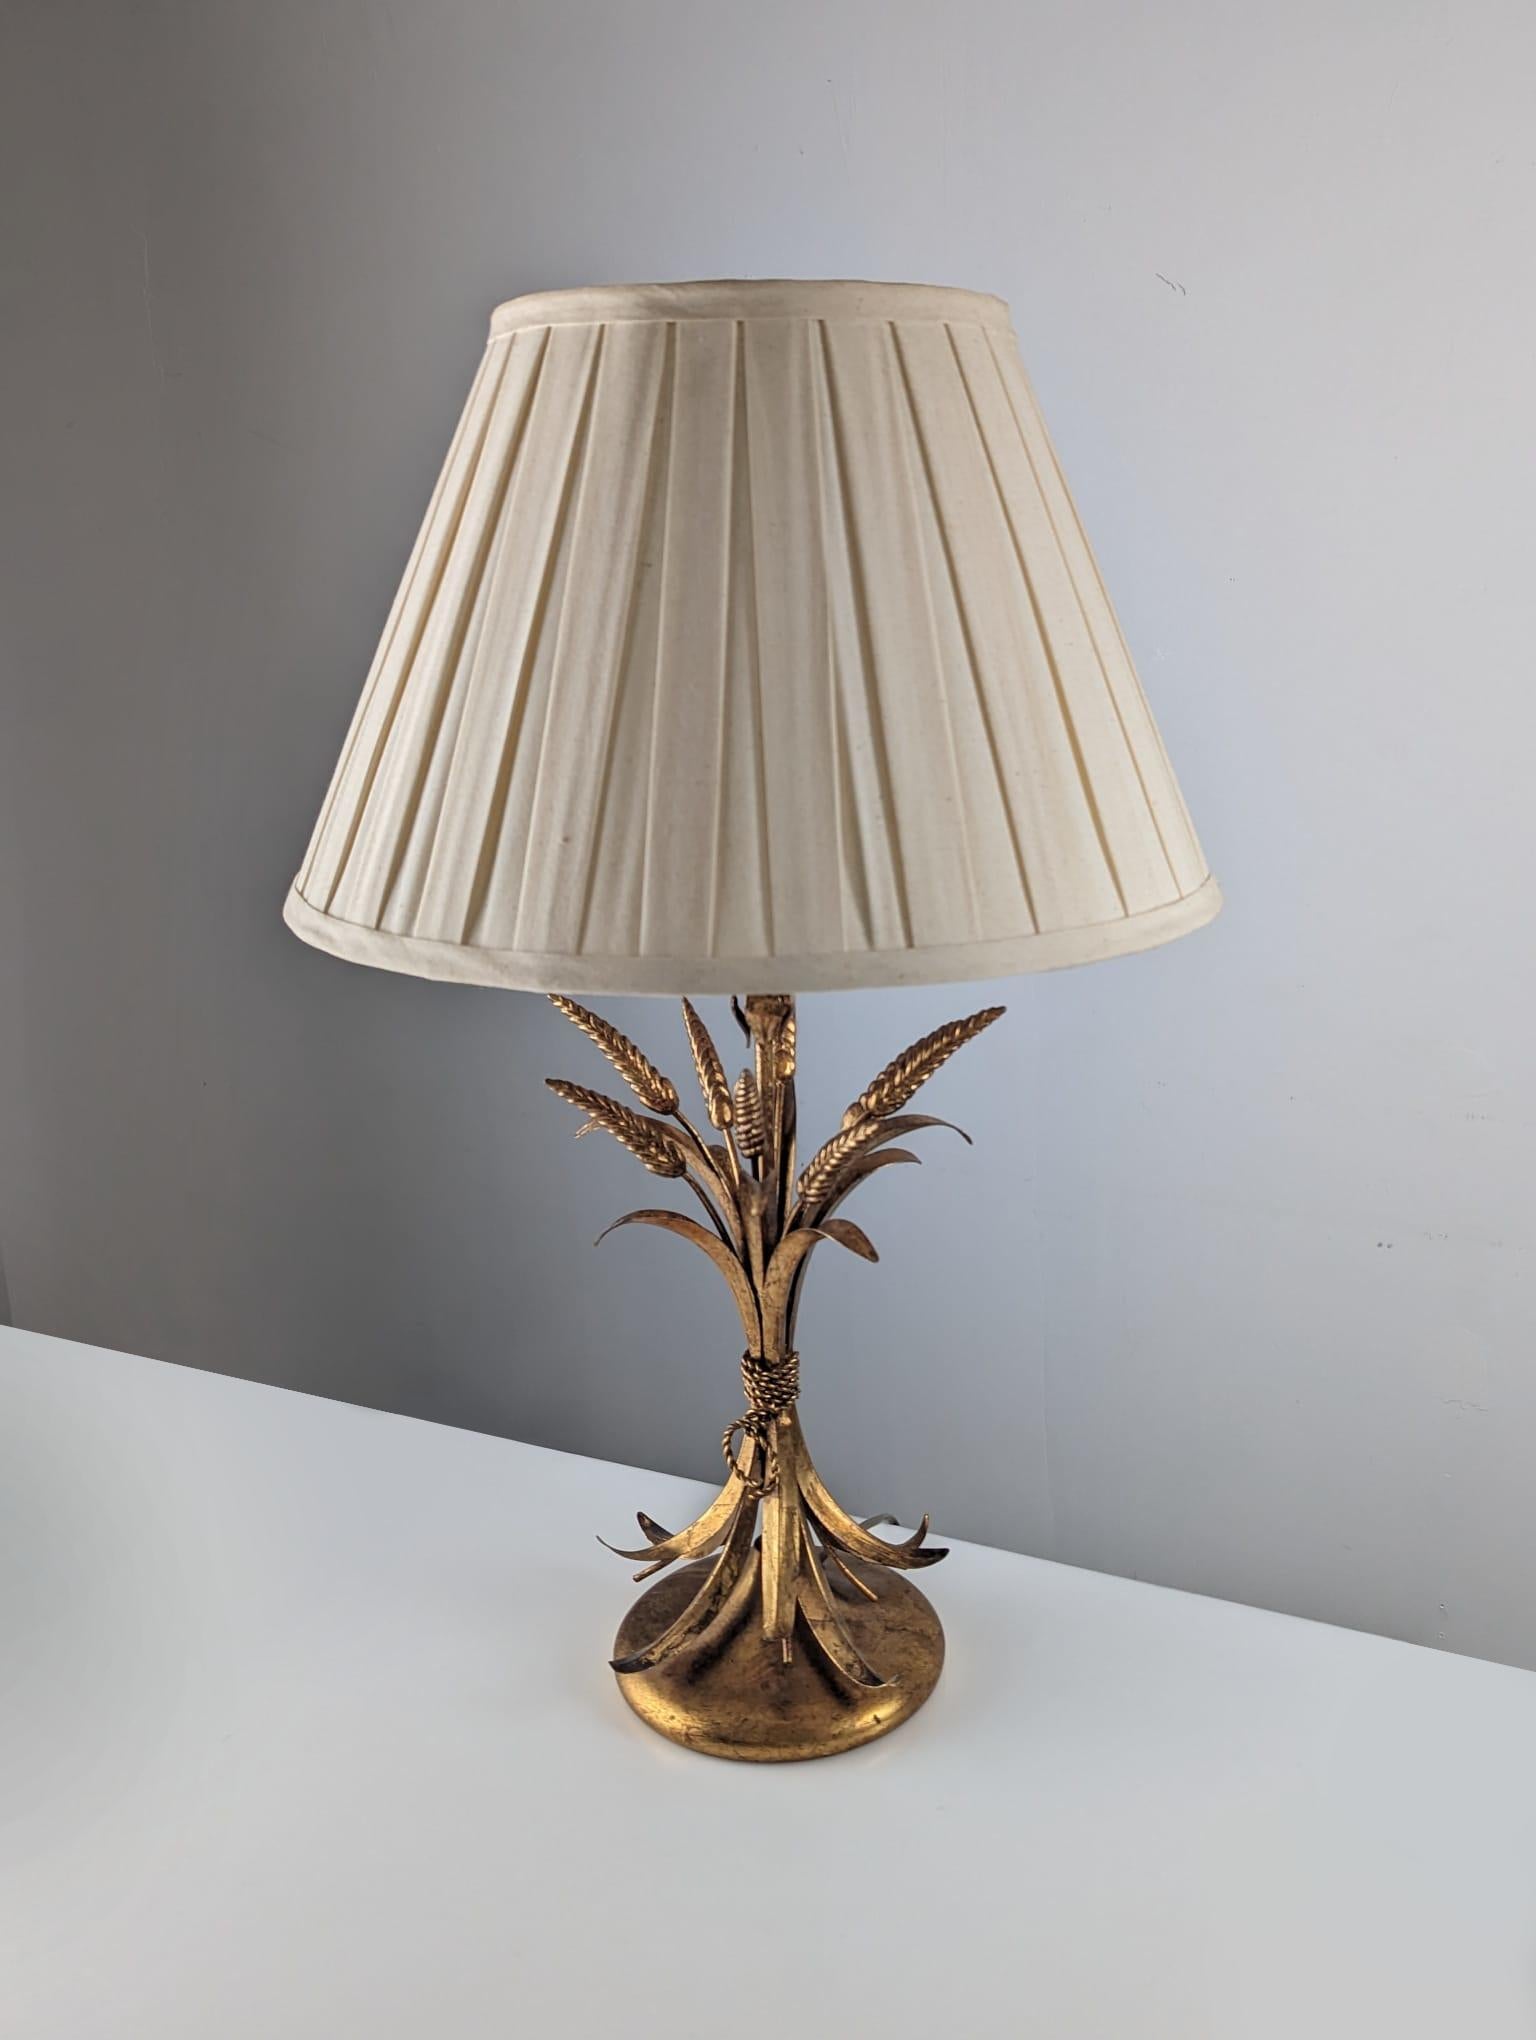 Beautiful table lamp in the shape of sheaves of wheat, design by Hans Kögl and an element that Coco Chanel always had in mind in her creations and that she transferred to the most exclusive decorations symbolizing prosperity and abundance.

Four